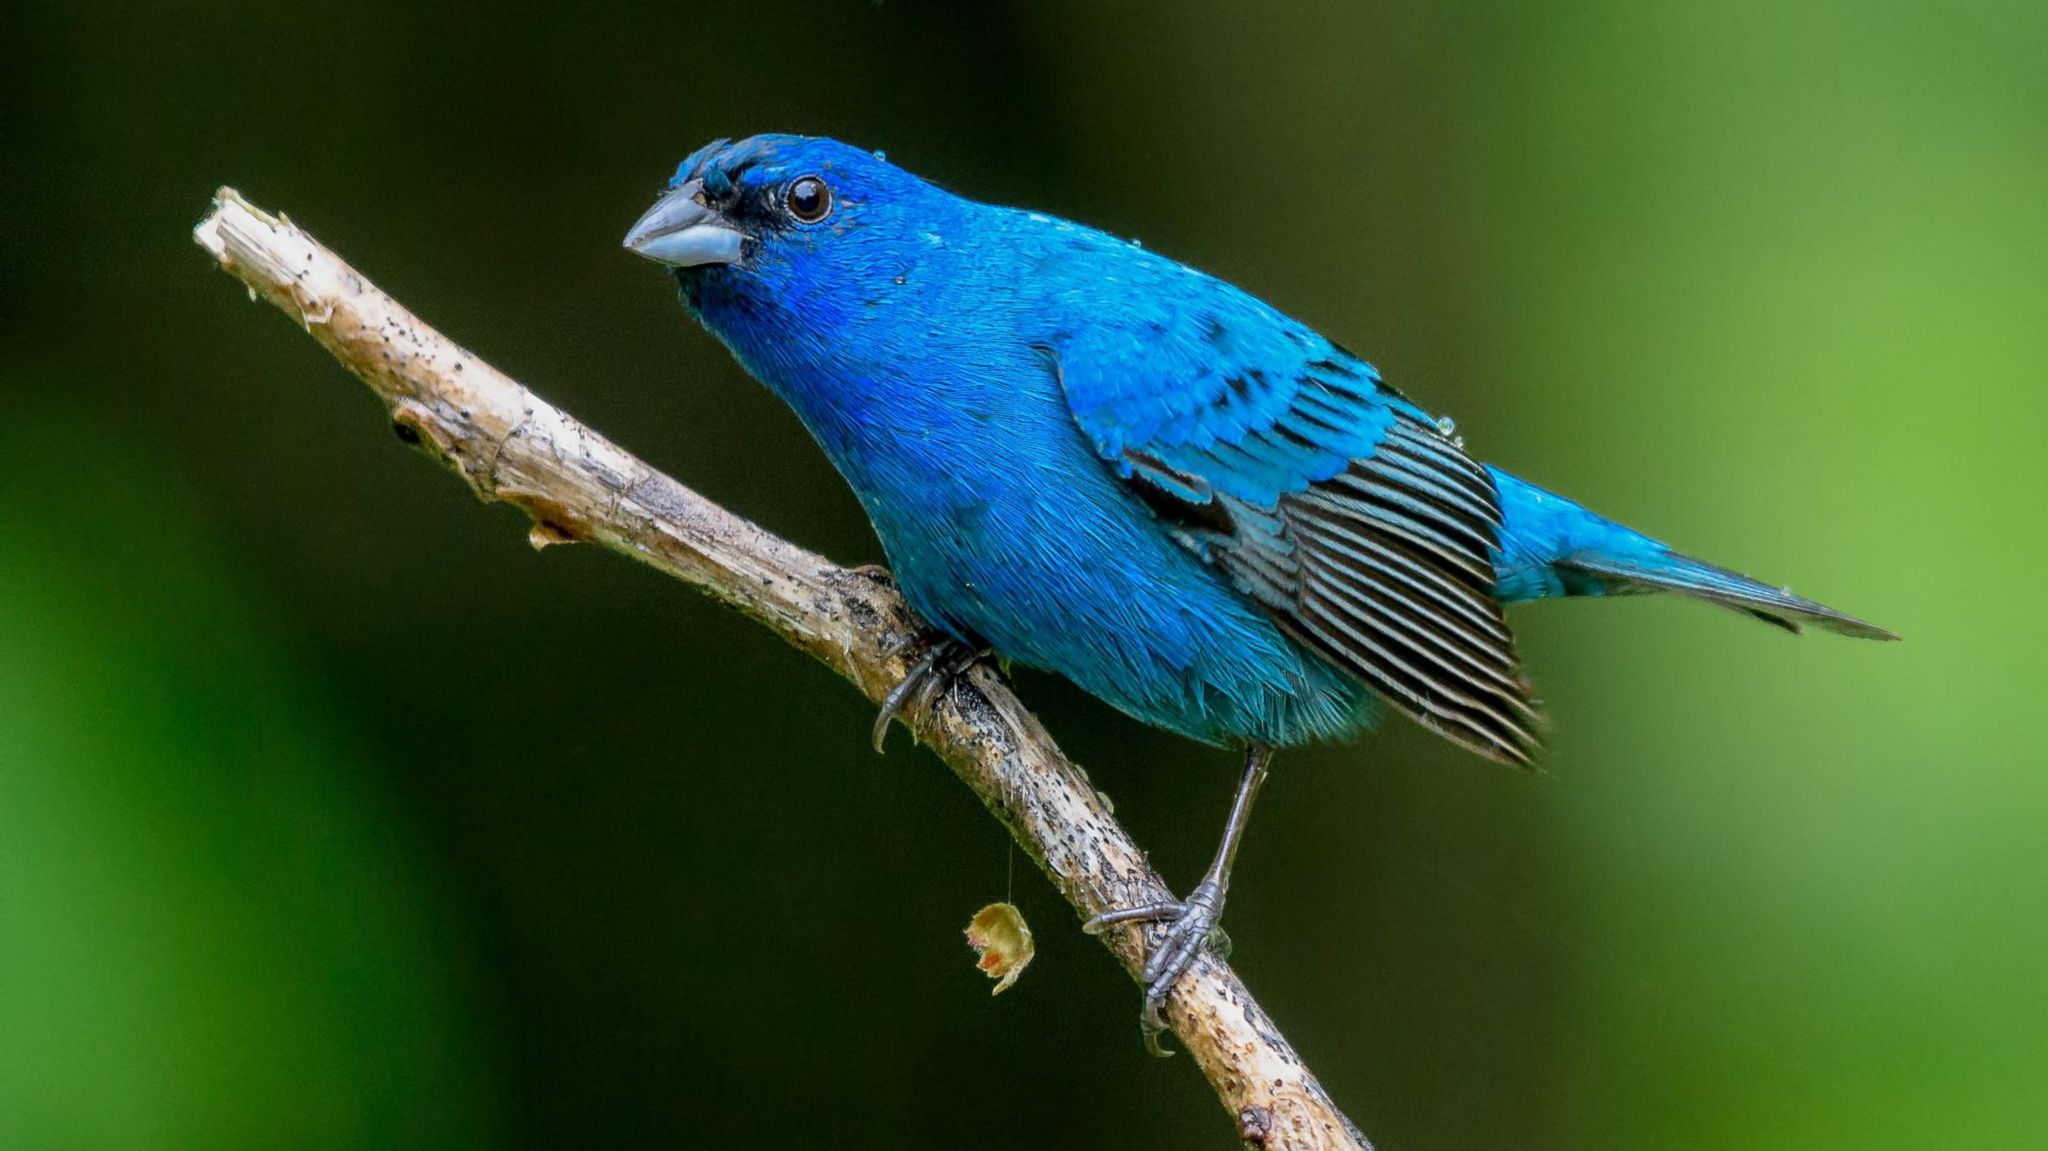 A small bright blue bird perched on a twig.